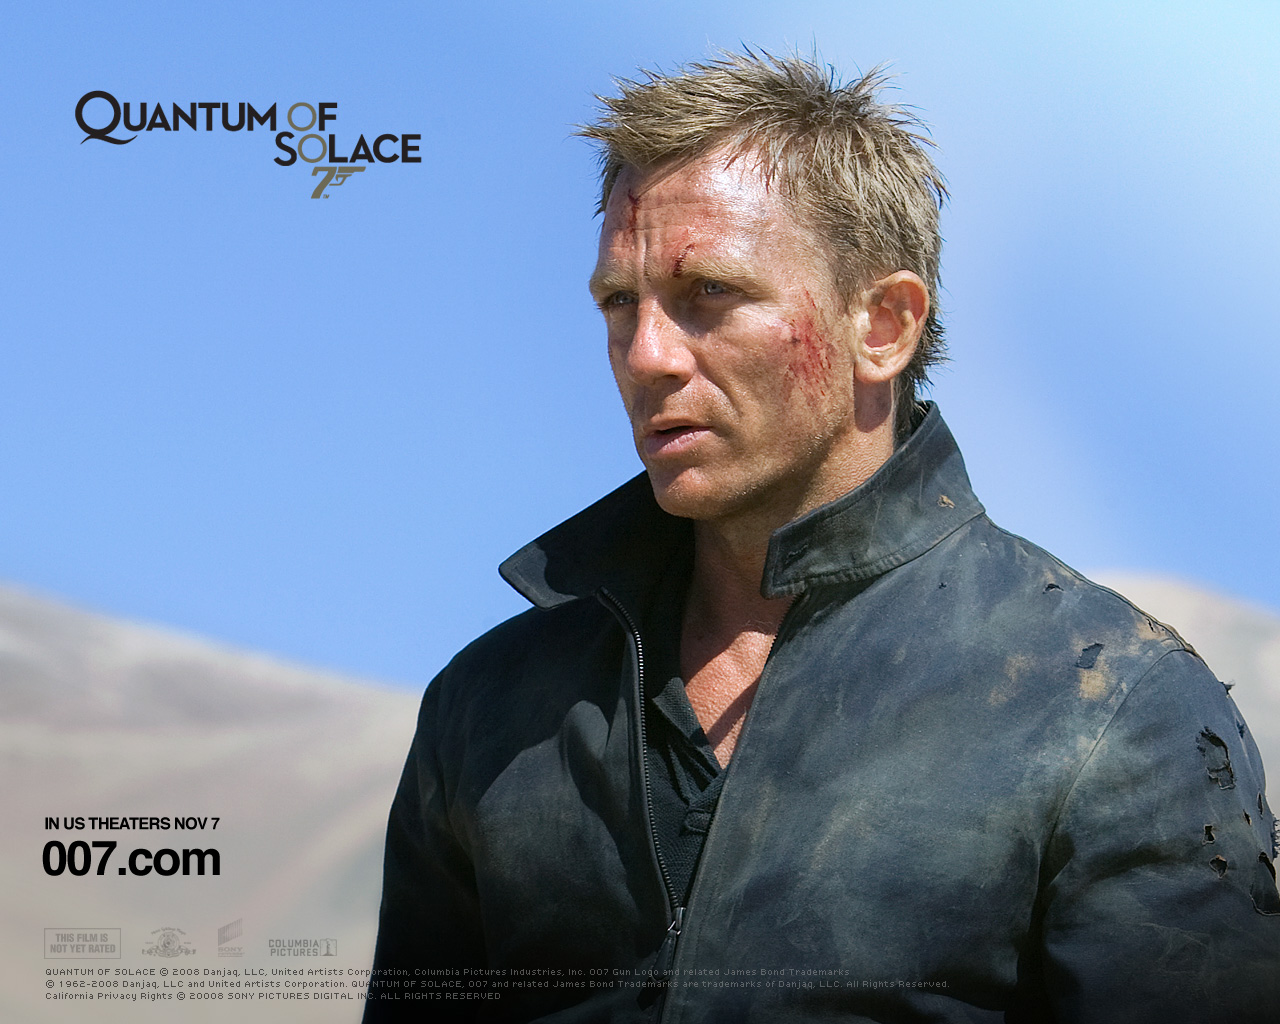 Download HQ 007 Quantum of Solace wallpaper / Movies / 1280x1024